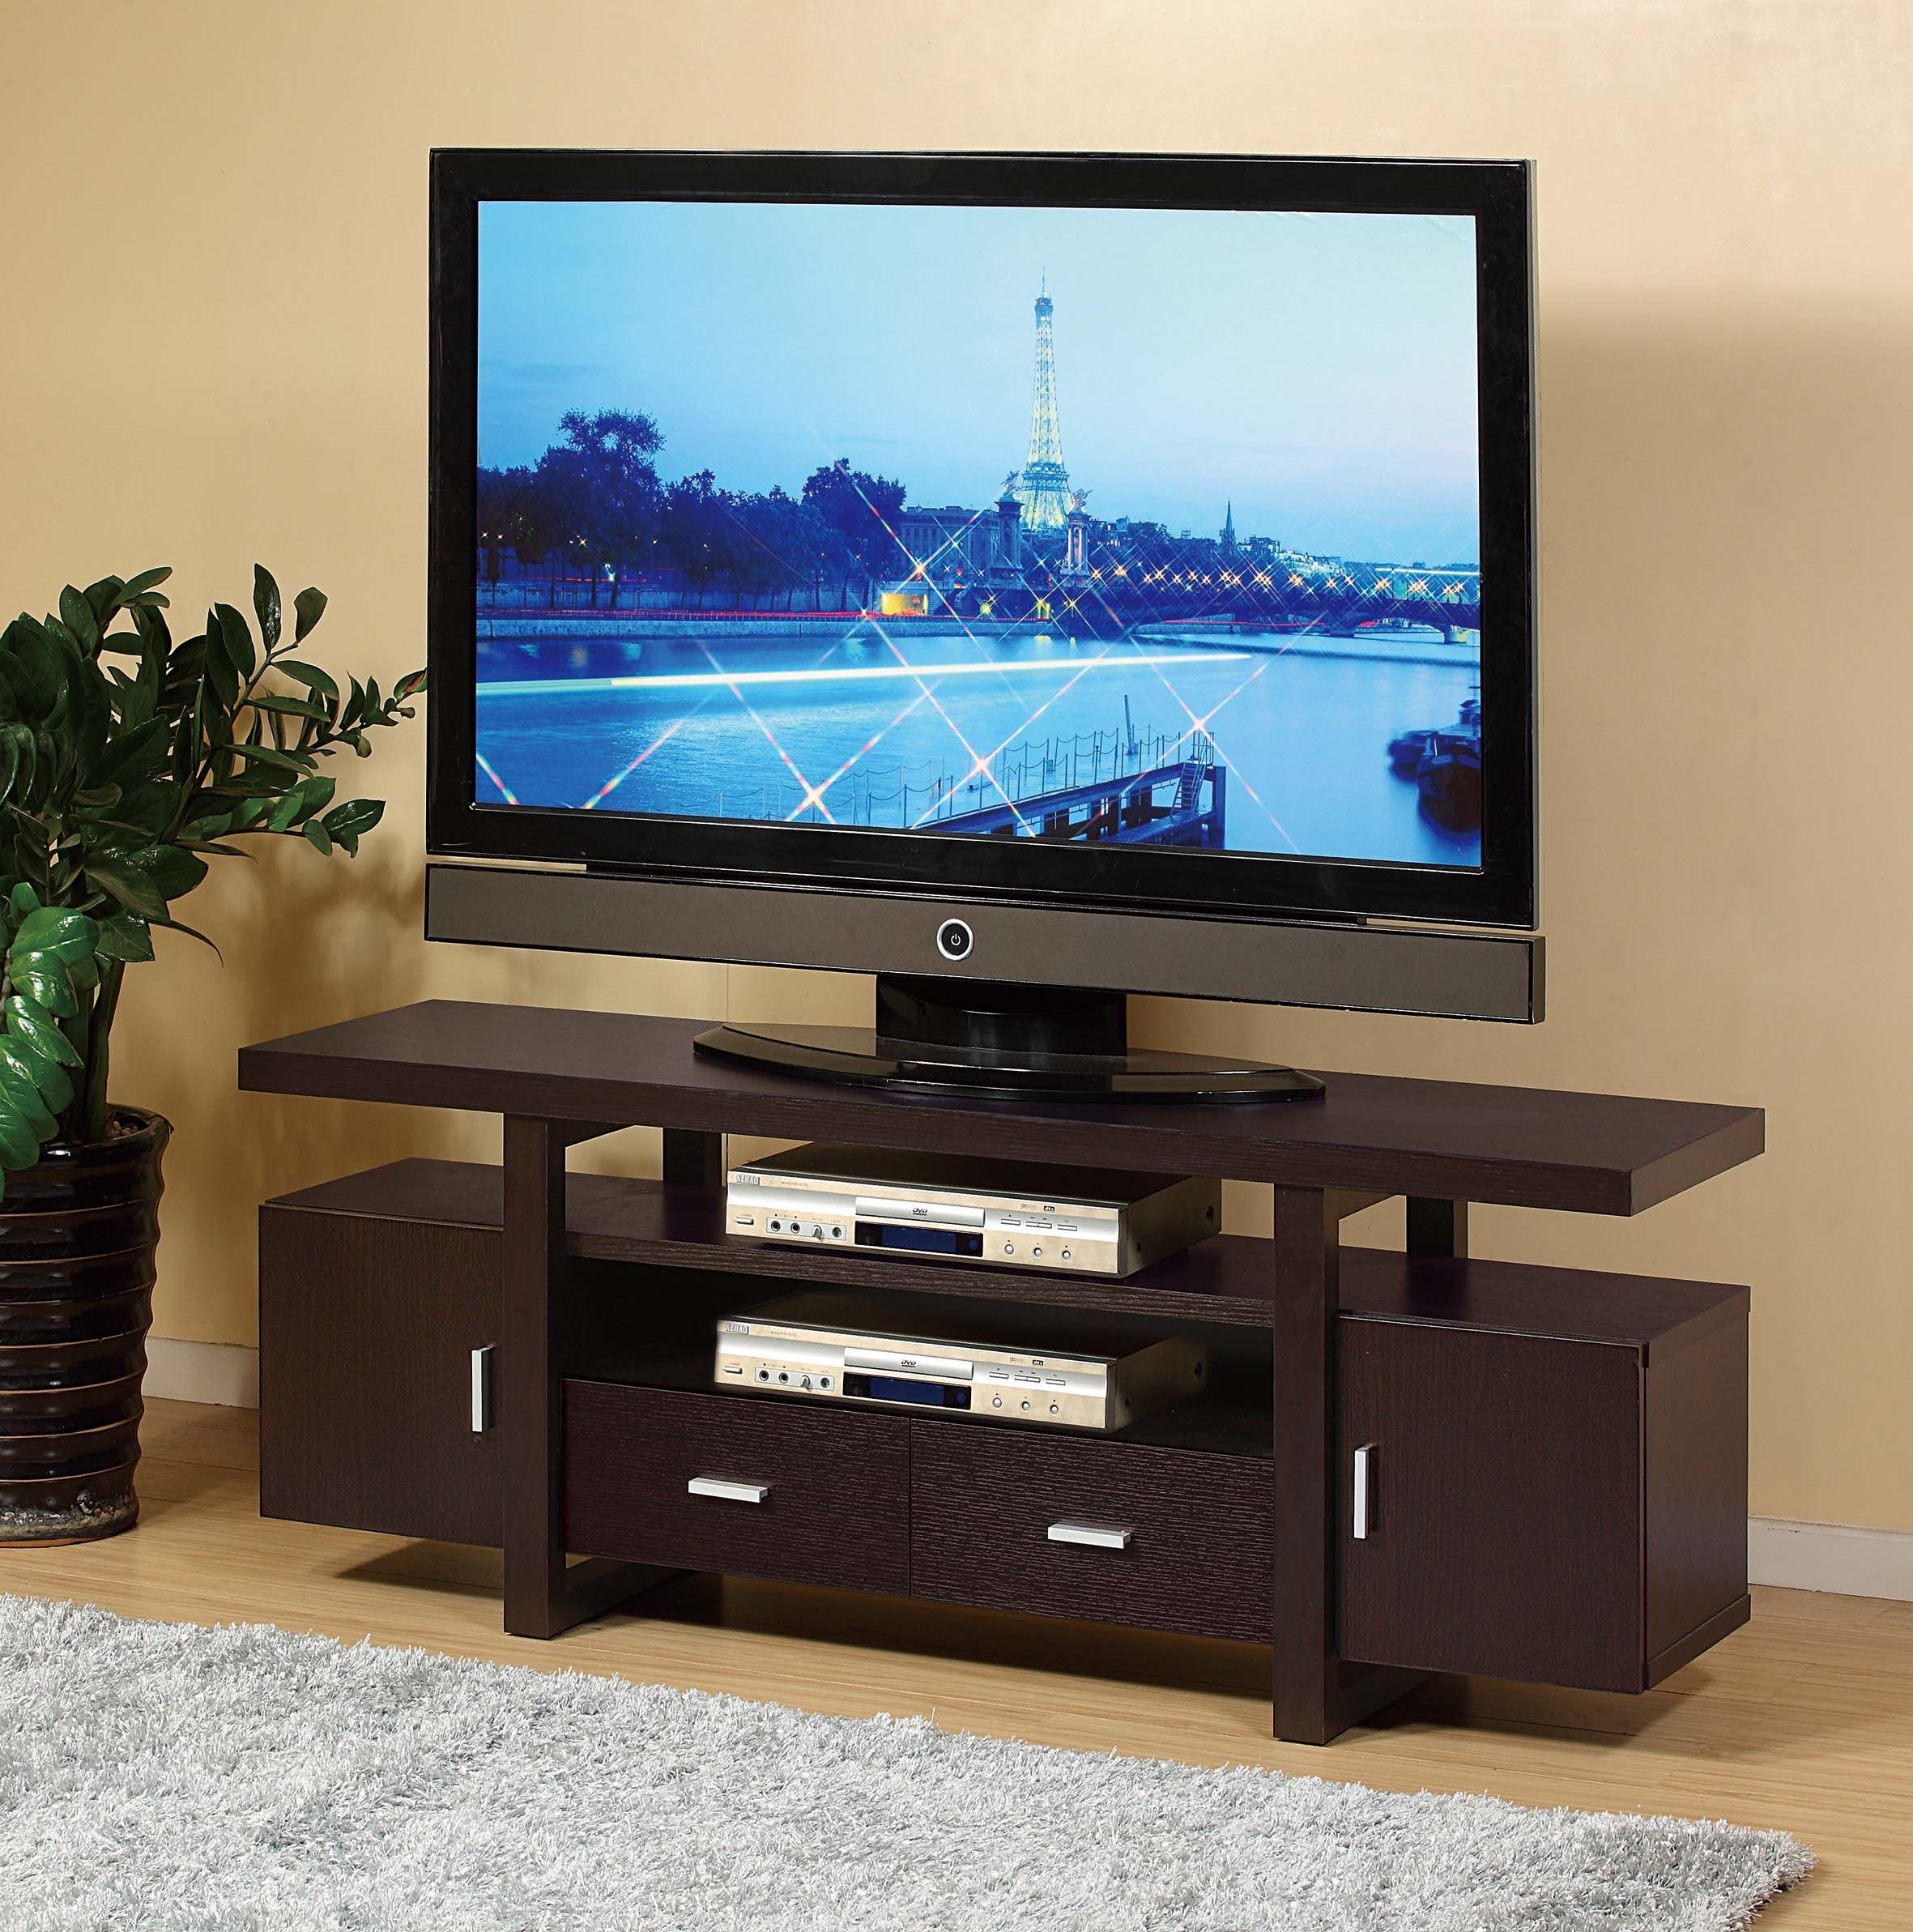 14890 Tv Stand – 60" Tv Stand Home Entertainment Storage With Regard To All Modern Tv Stands (View 15 of 15)